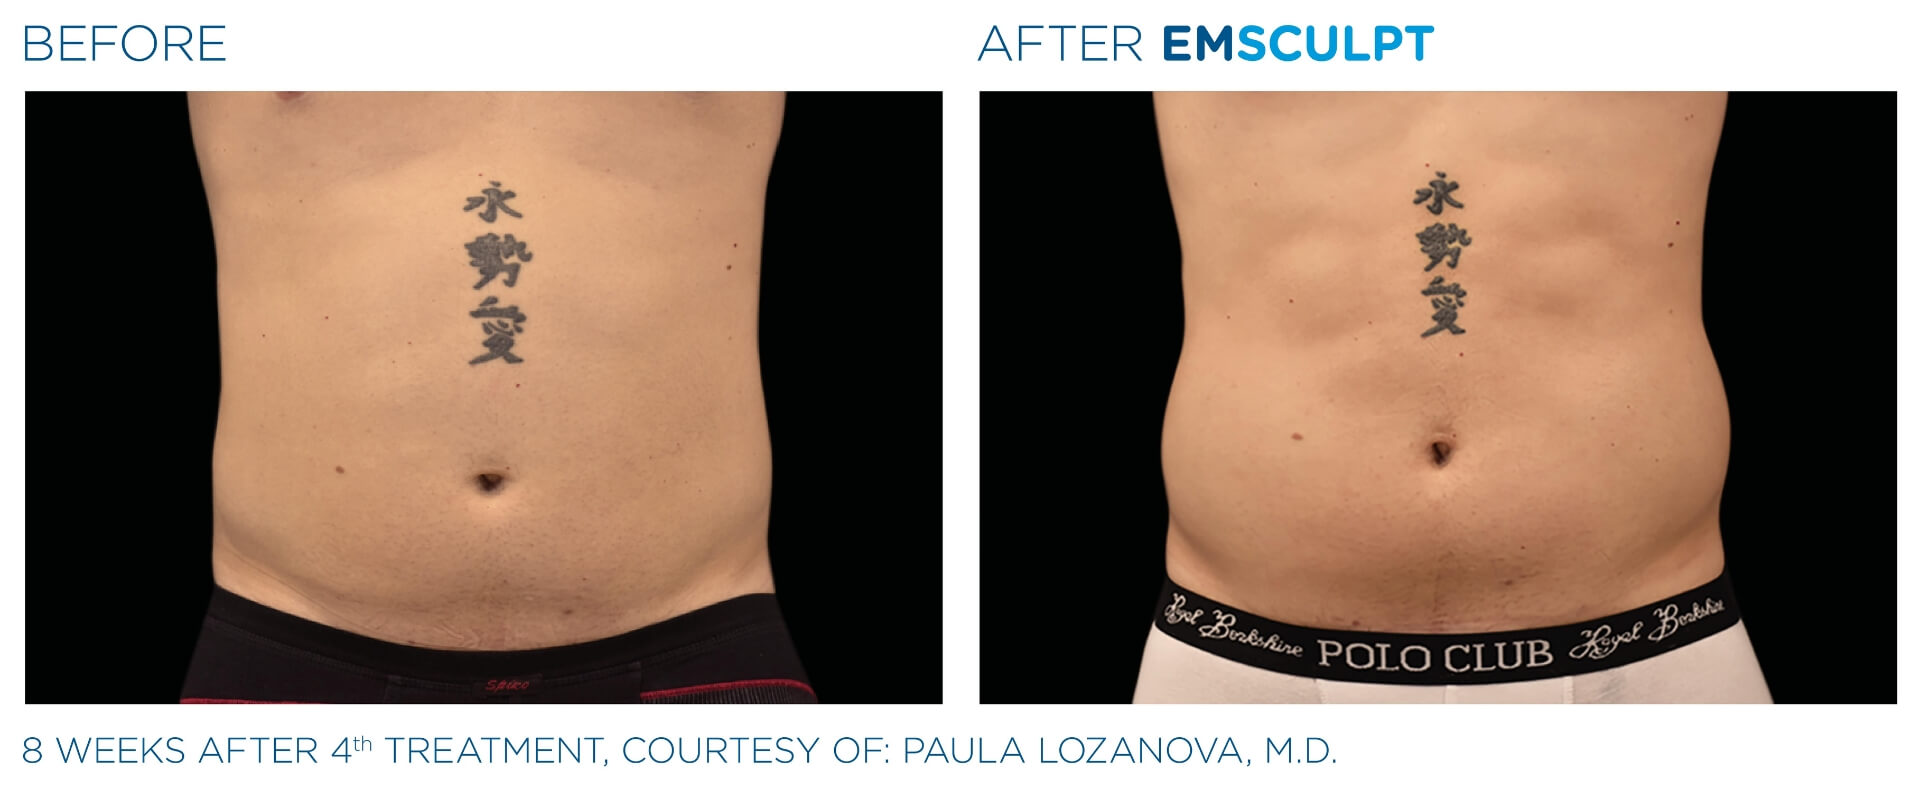 four-seasons-obgyn-emsculpt-before-and-after-1